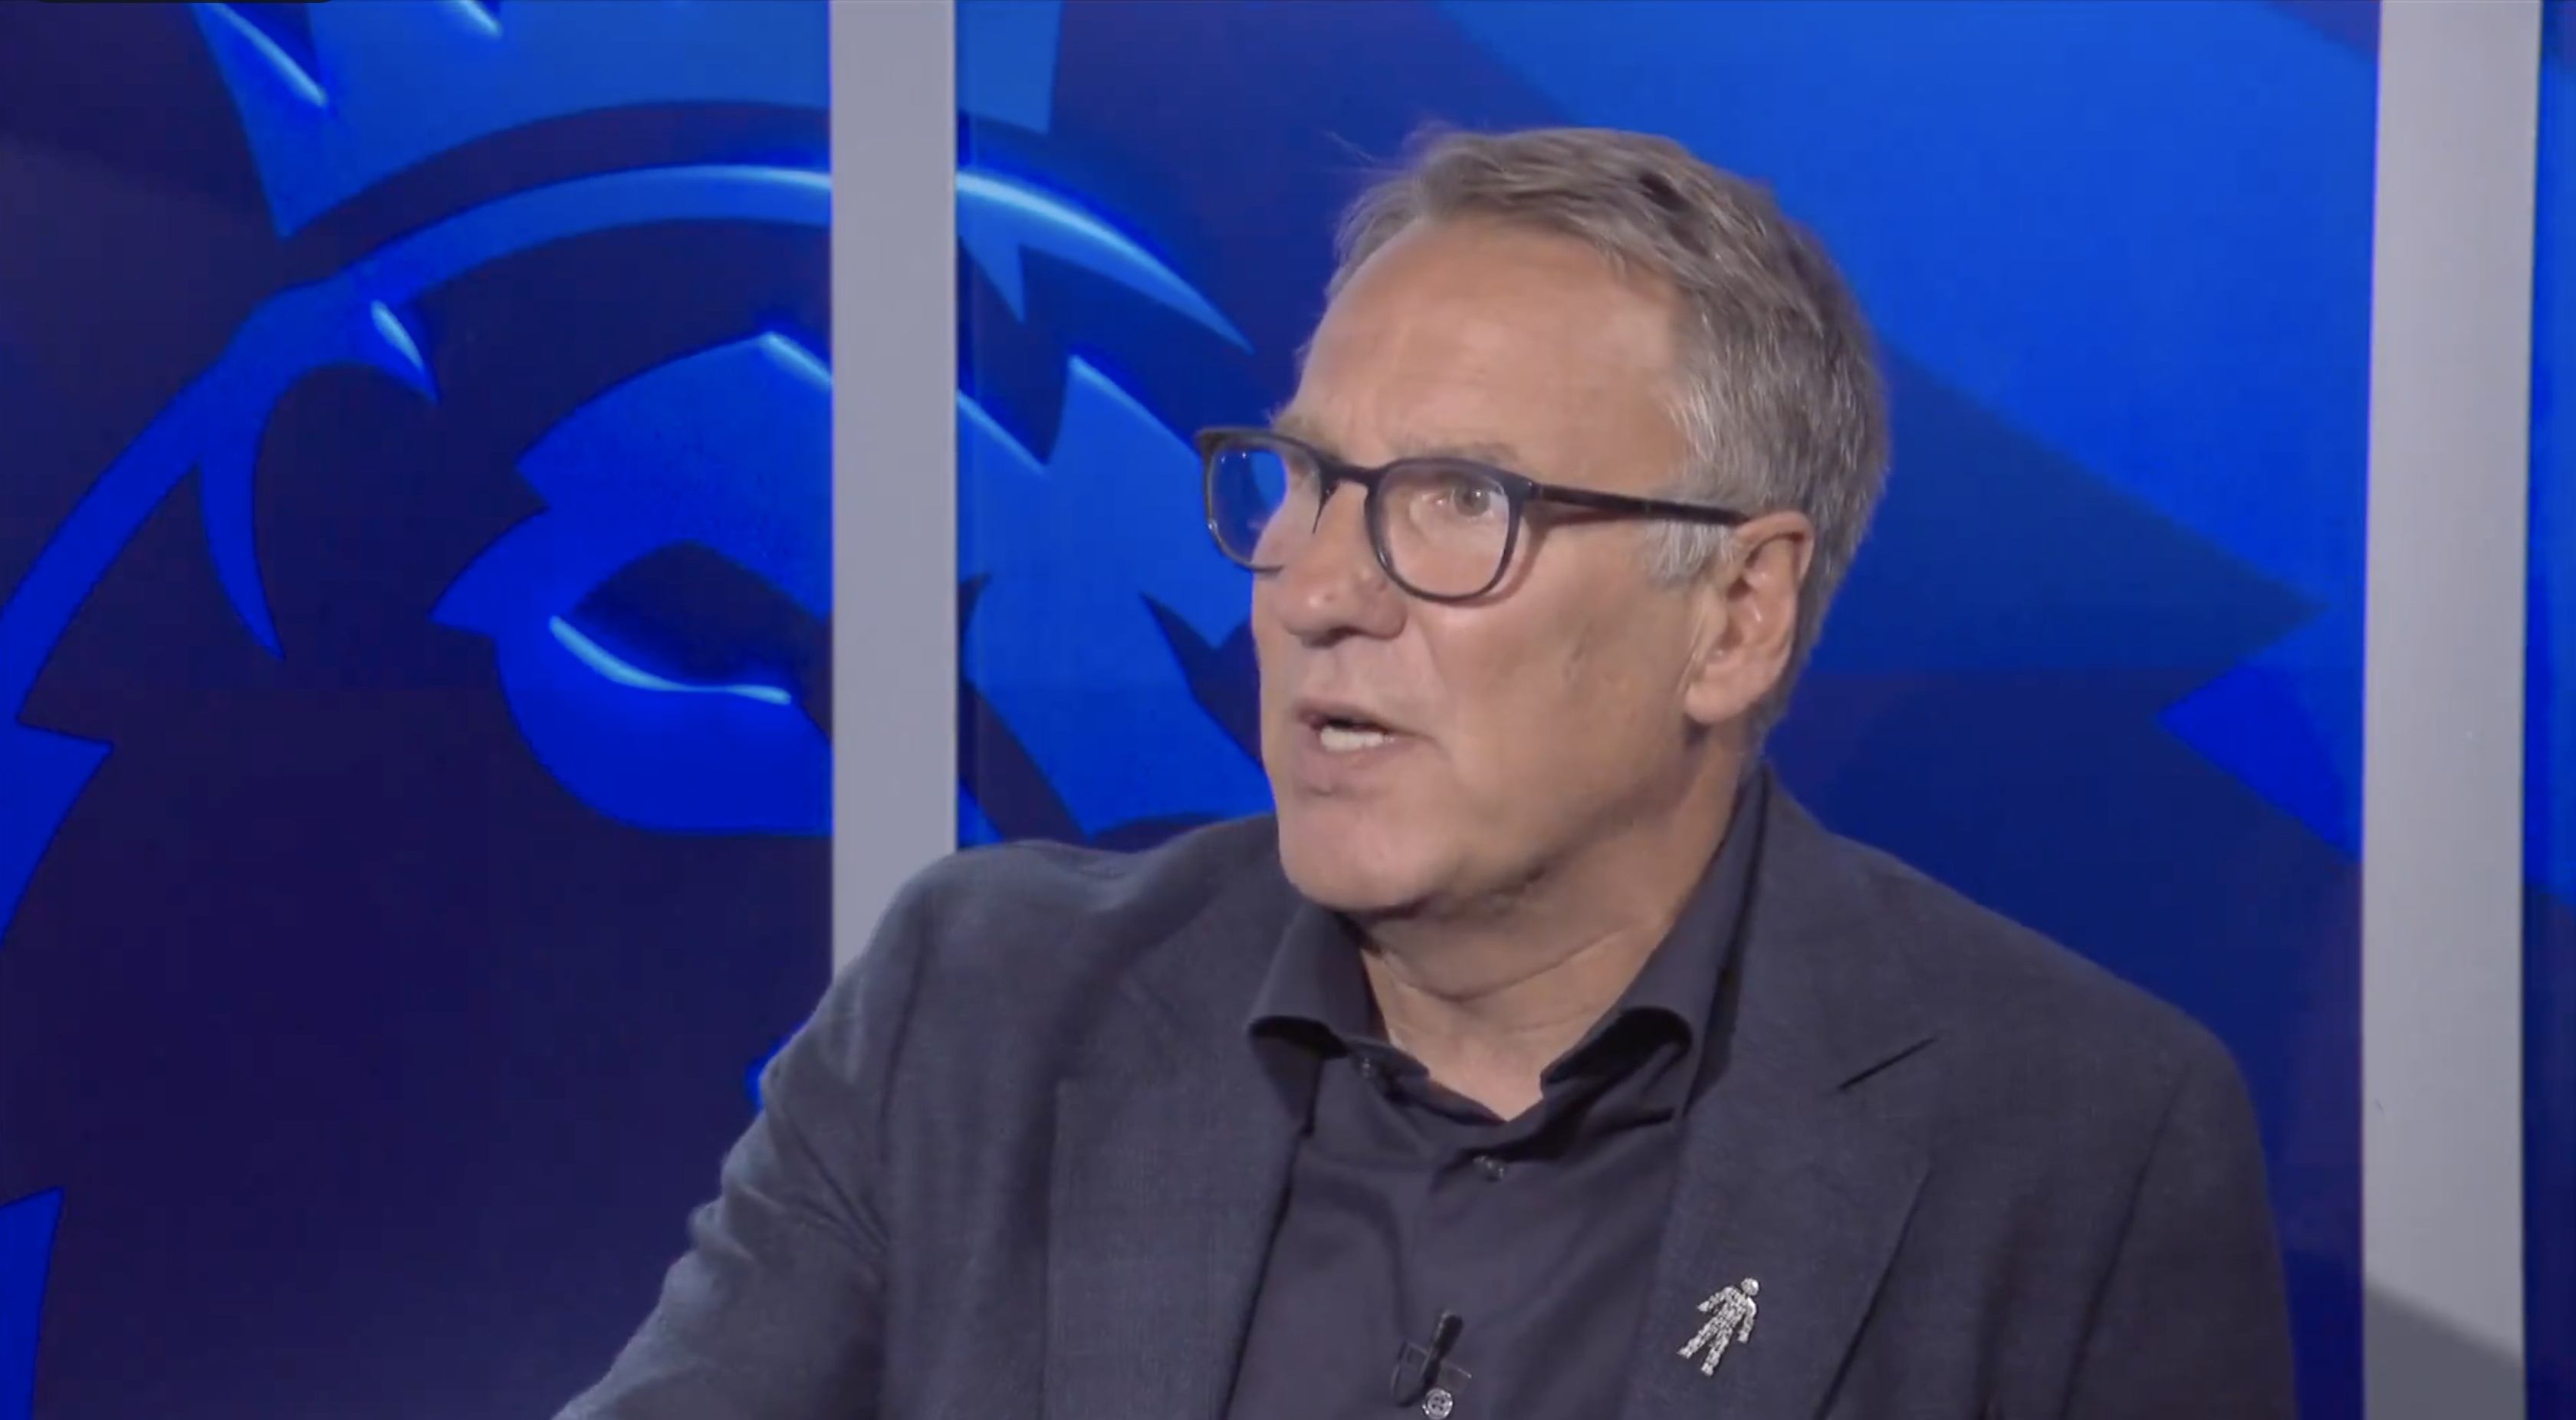 Video: “They didn’t play well at all” – Paul Merson on Arsenal win